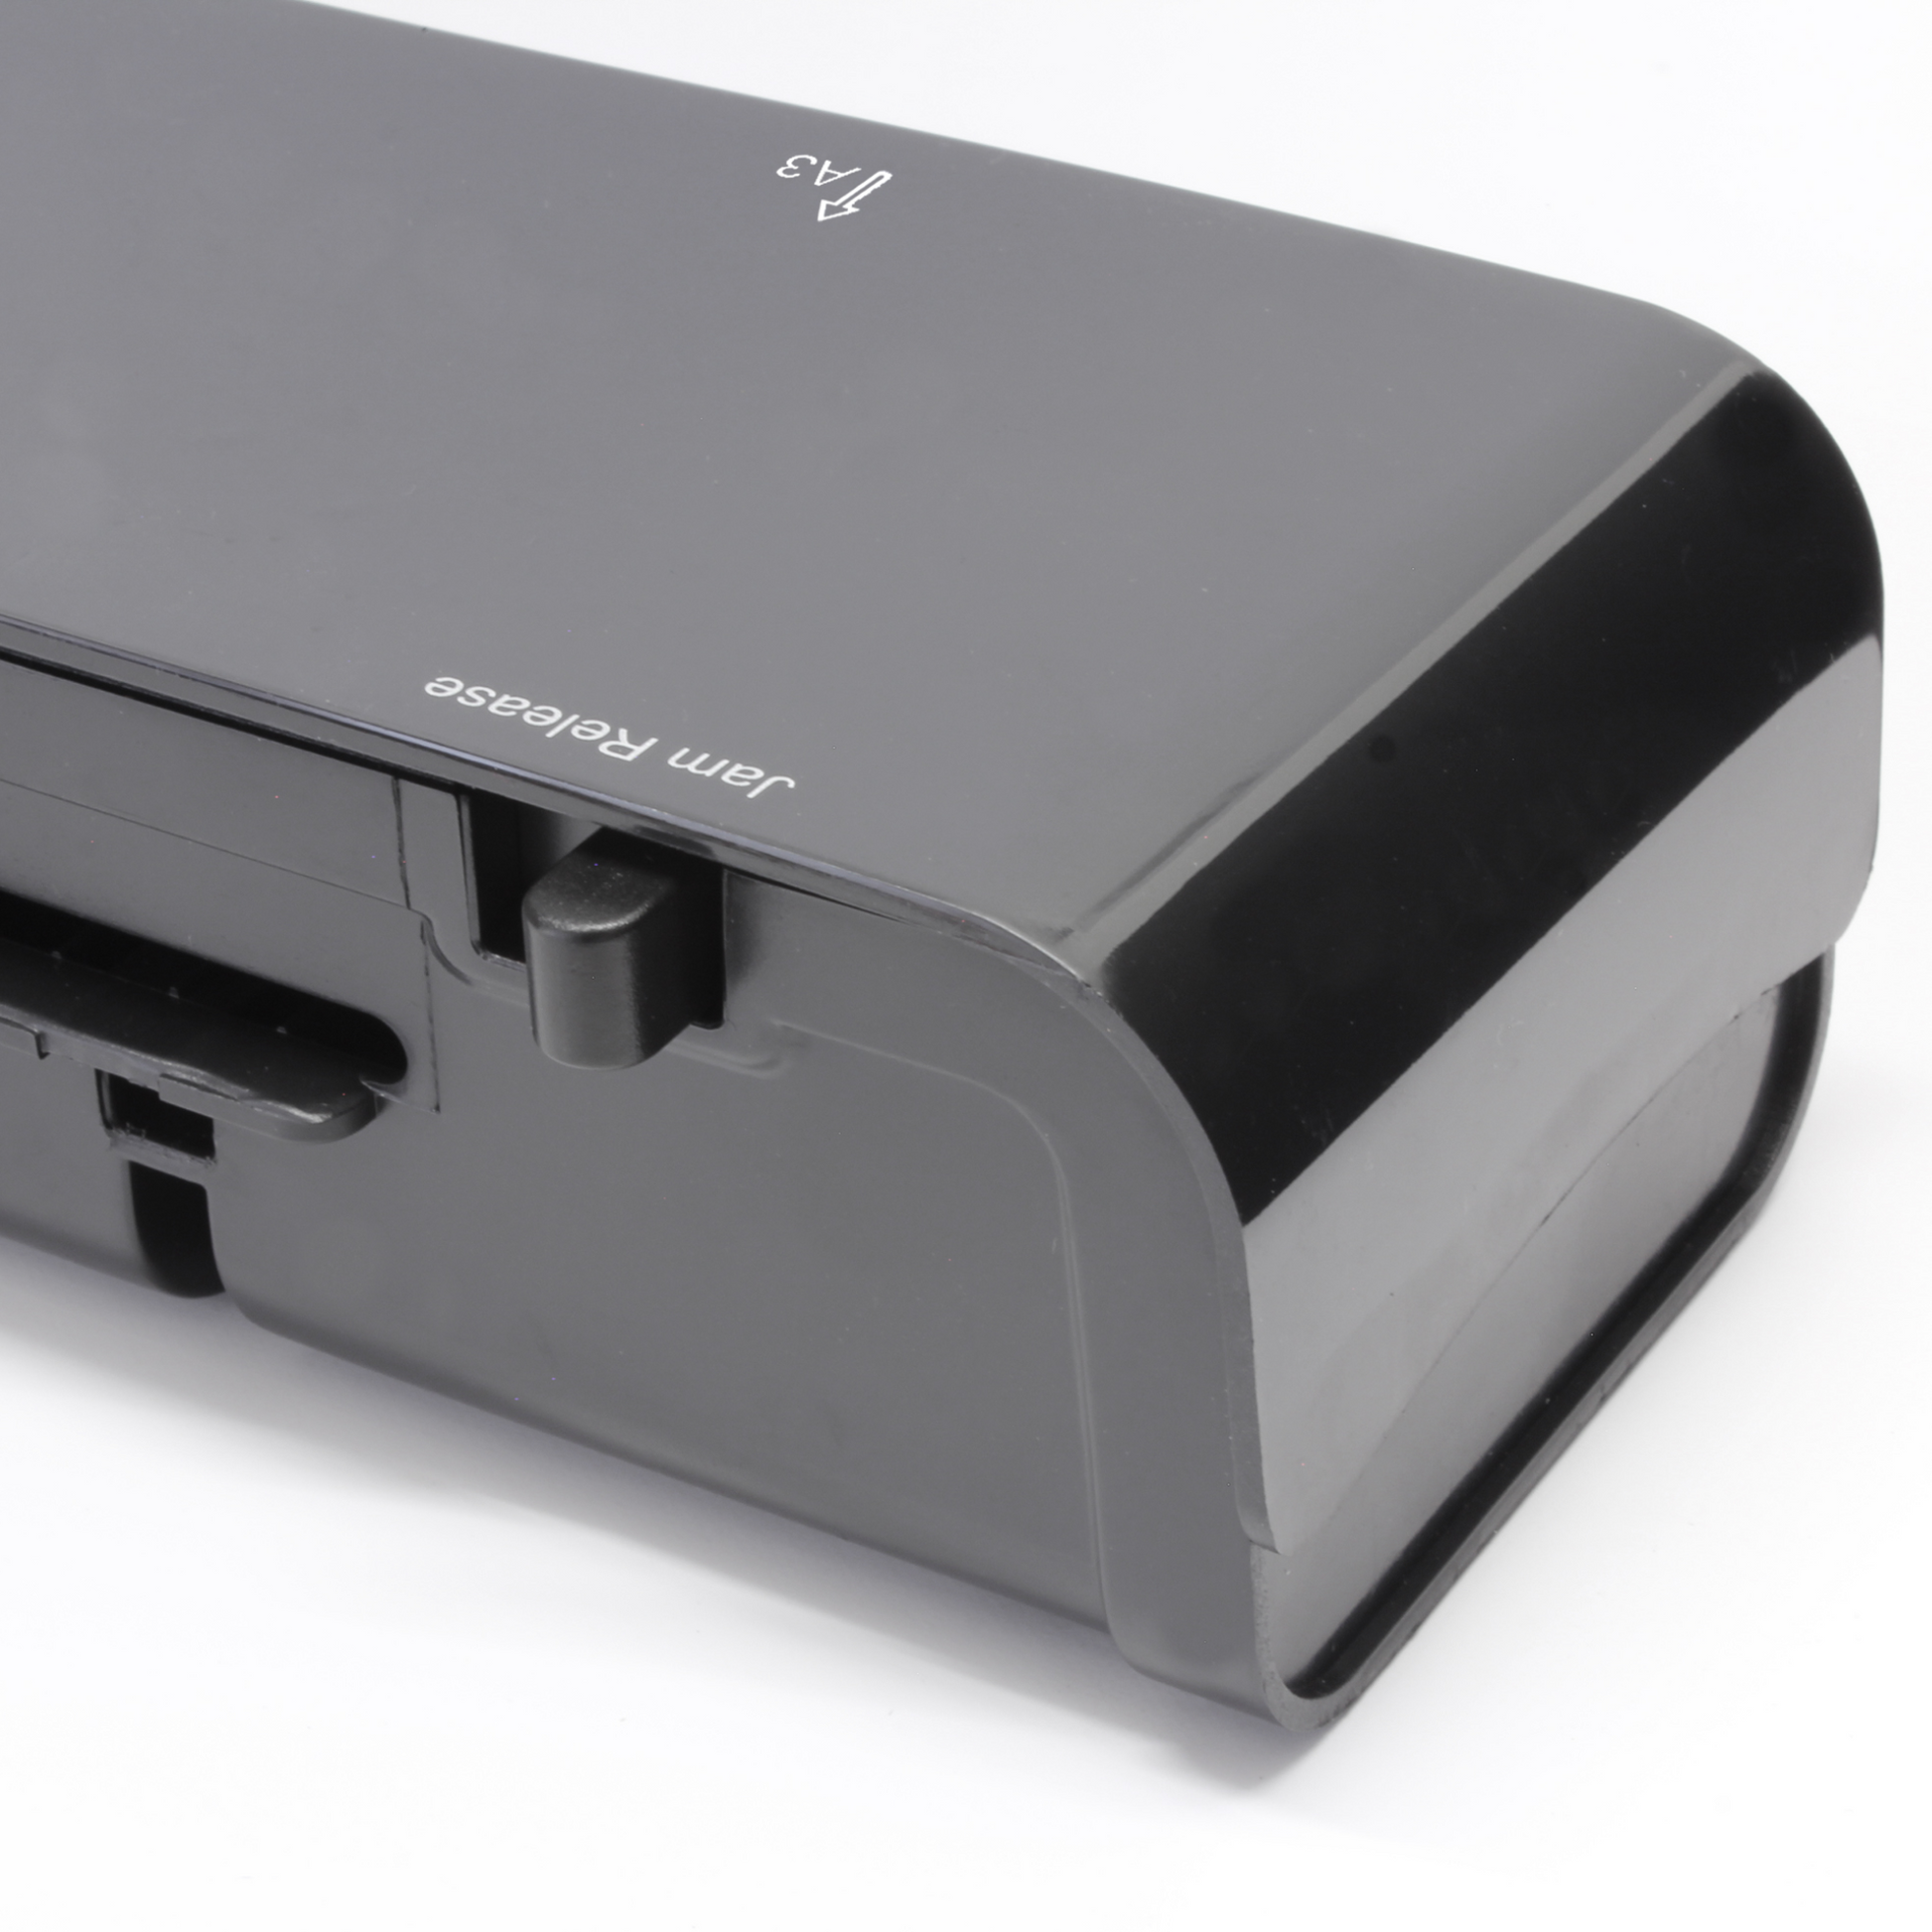 Side view of a Cathedral Products A3 laminator, featuring the jam release lever, emphasizing the device's sleek design and functionality for smooth laminating operations.